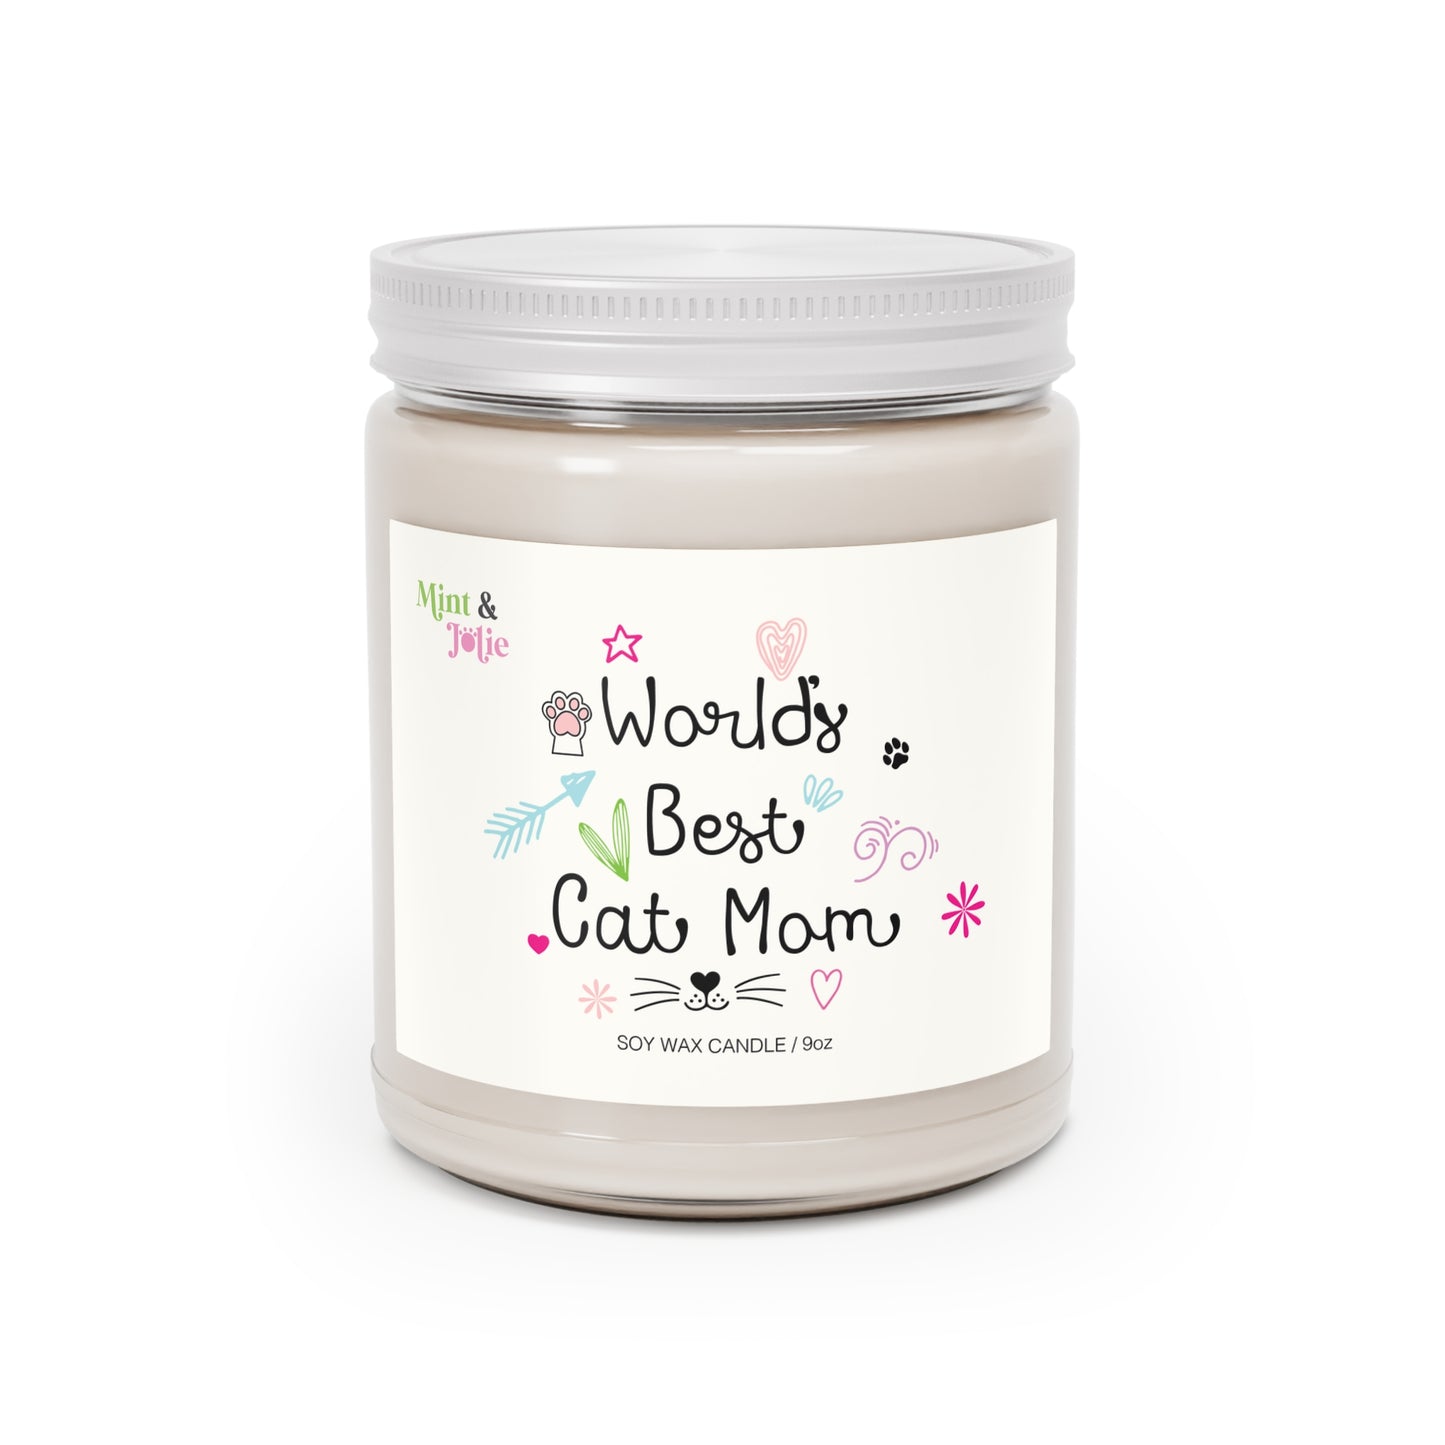 World's Best Cat Mom Scented Candles, 9oz